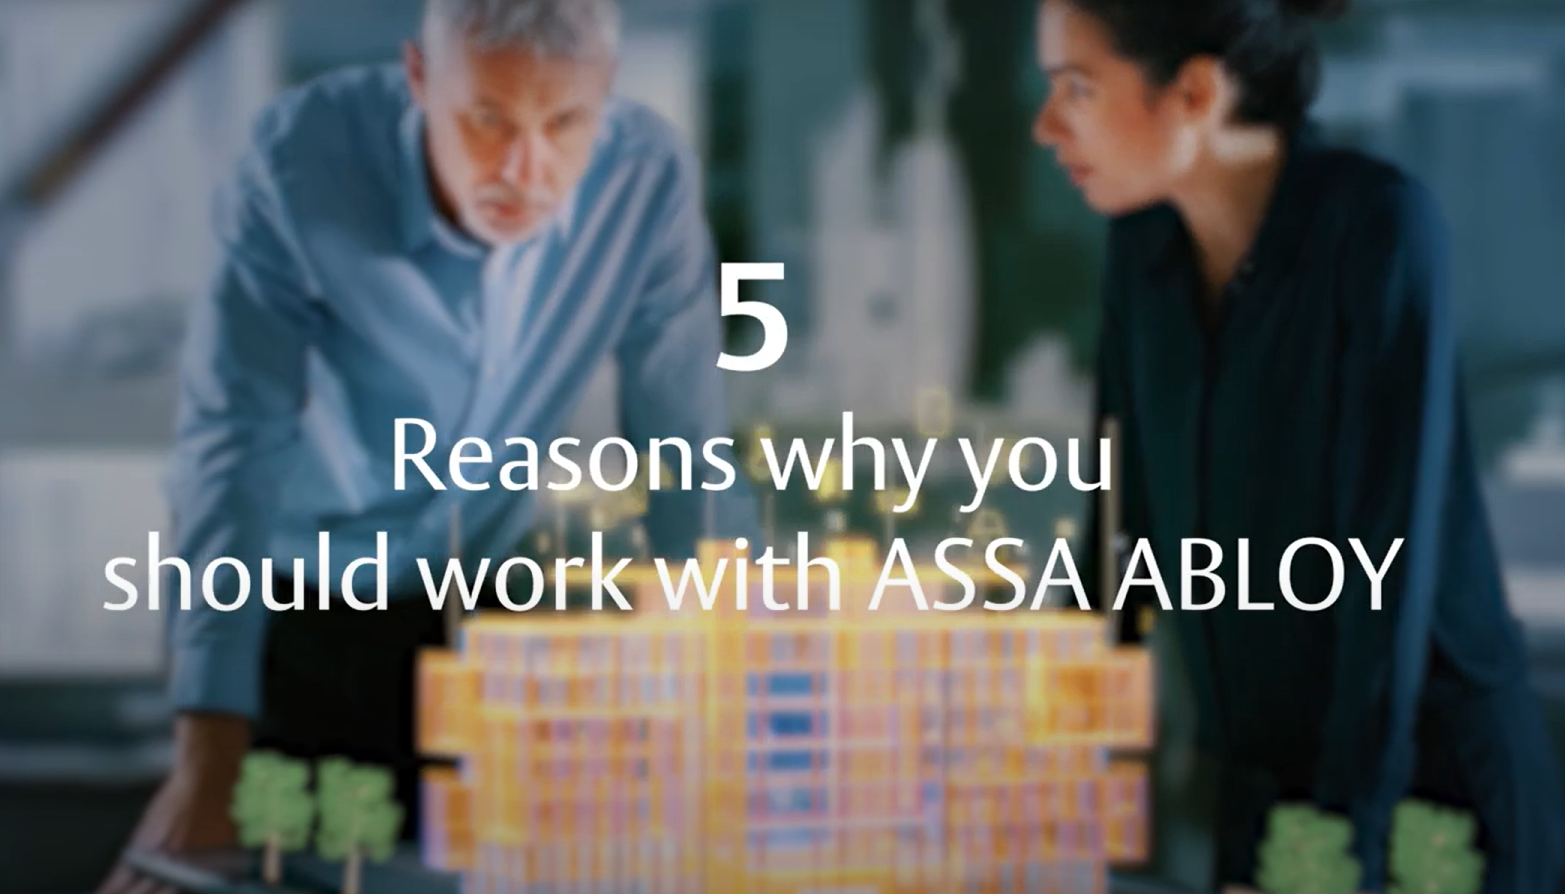 Why should you work with ASSA ABLOY? Here are 5 reasons.